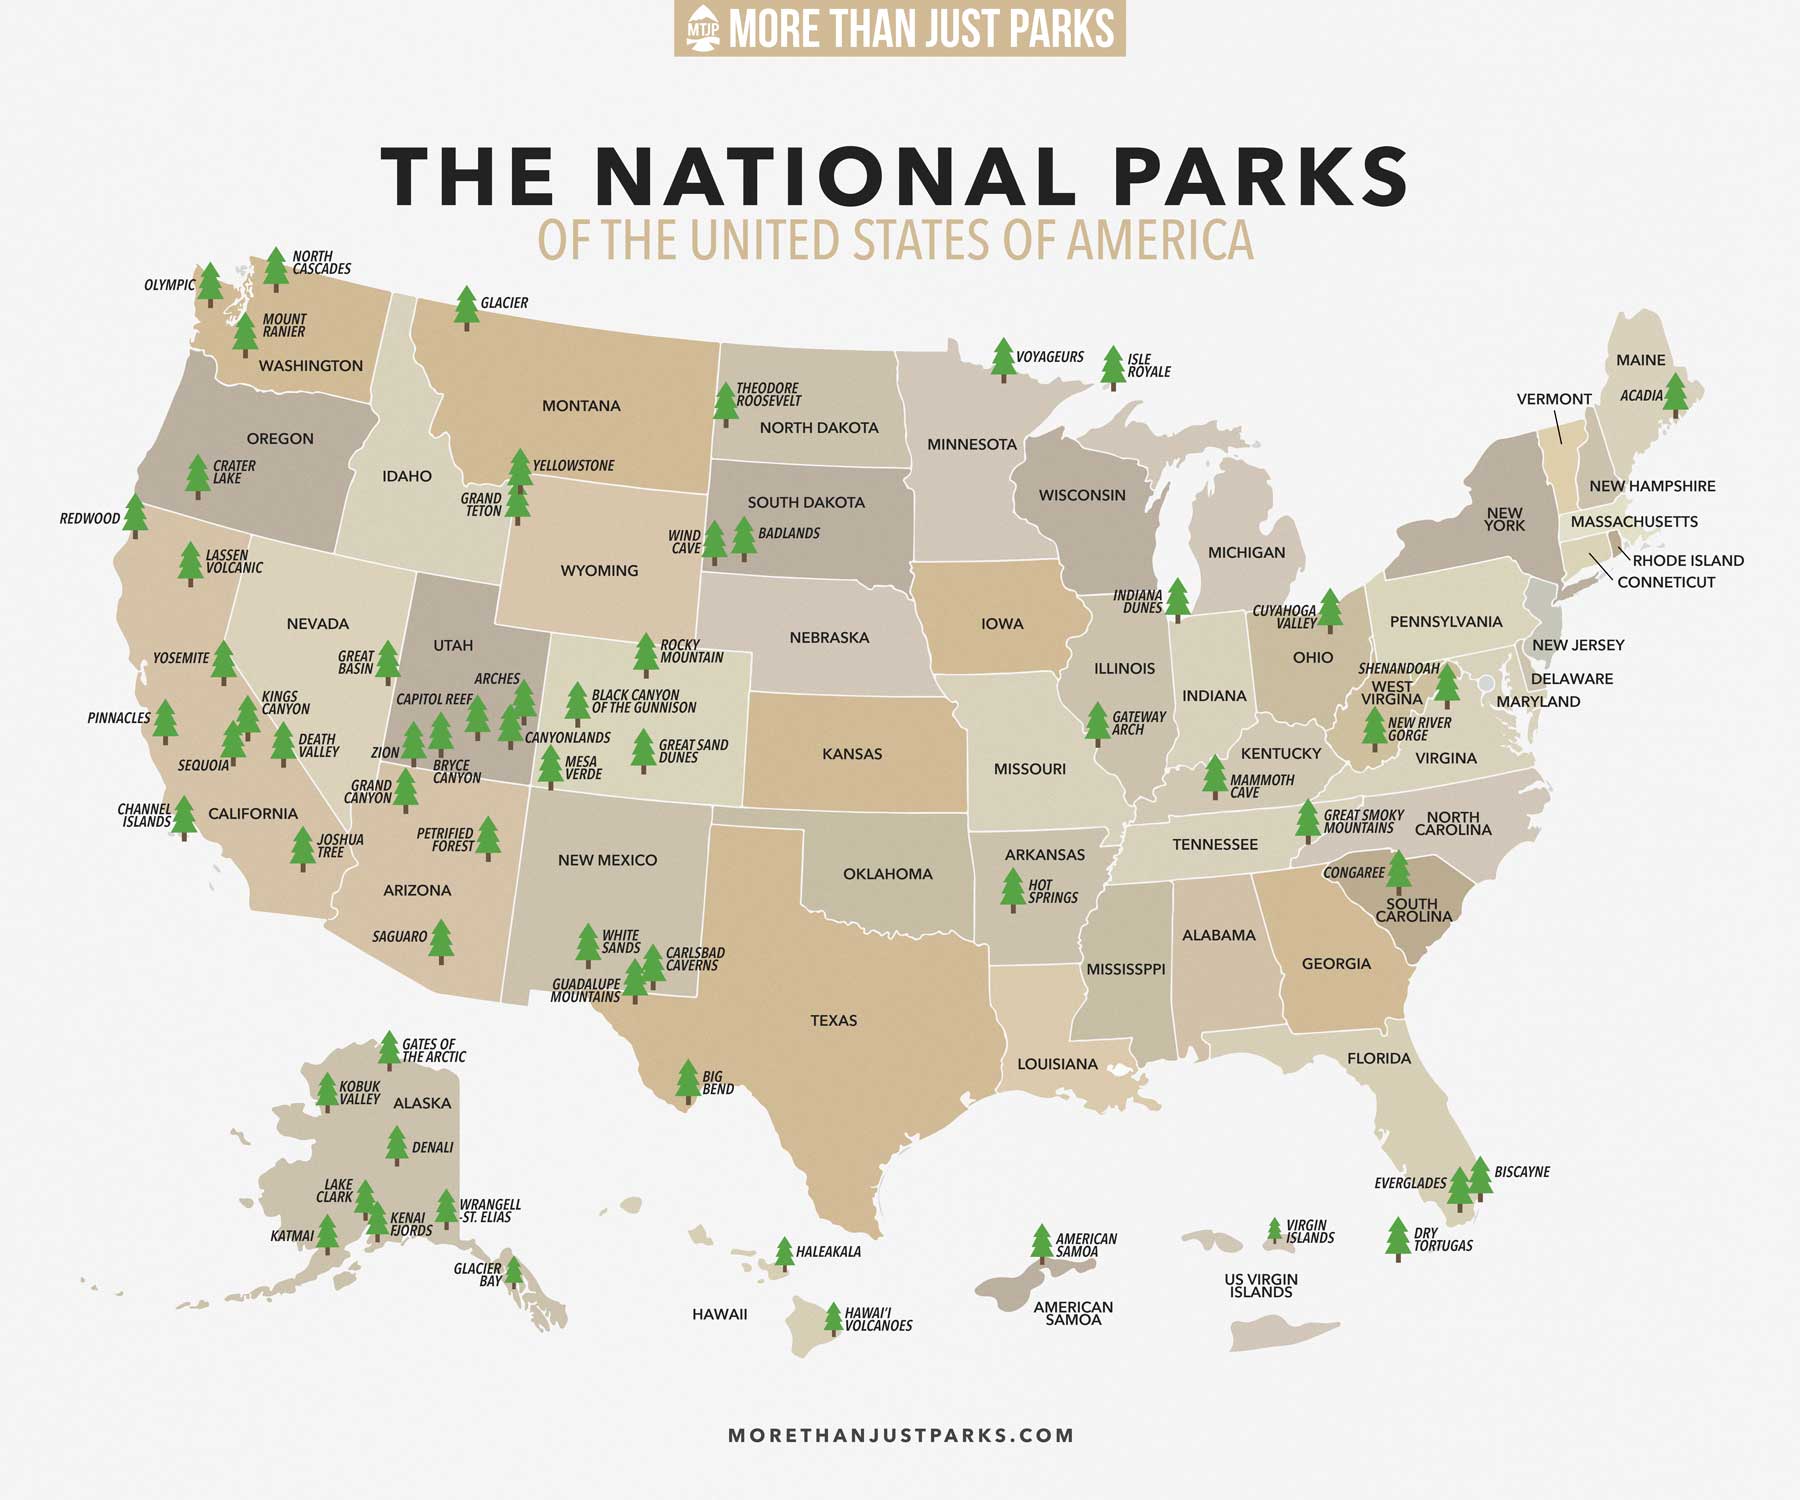 Complete List of NATIONAL PARKS By State (& Printable MAP)